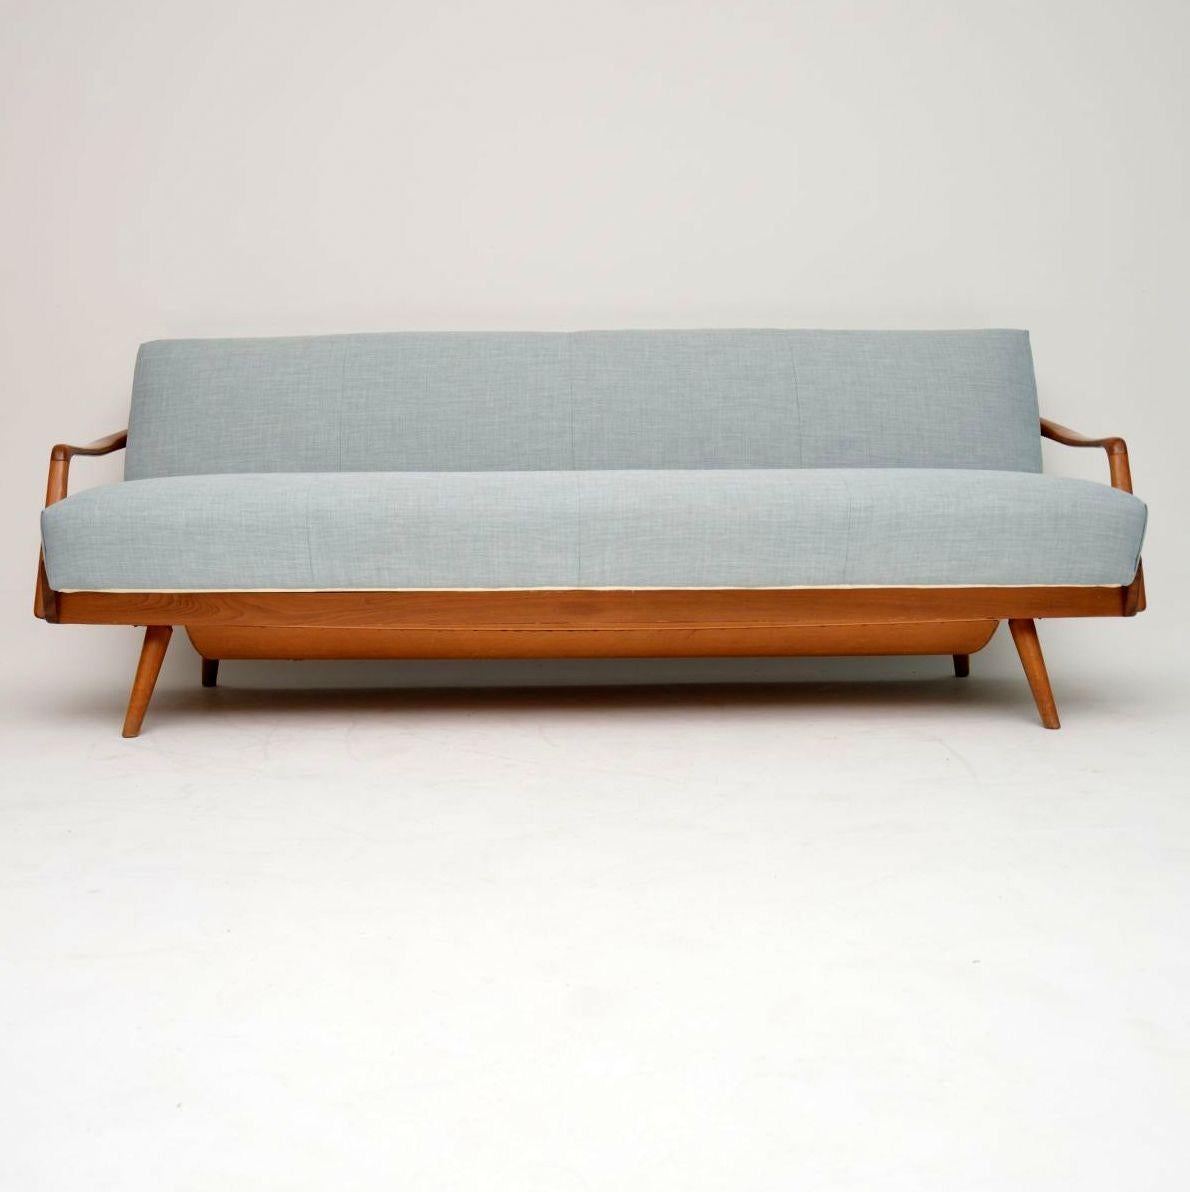 A stunning vintage sofa bed, this was made in France and dates from circa 1950s-1960s. We have had it fully re-upholstered in our lovely light blue fabric. The solid wood frame is a light wood that looks like it could be Ash, it’s clean, sturdy and